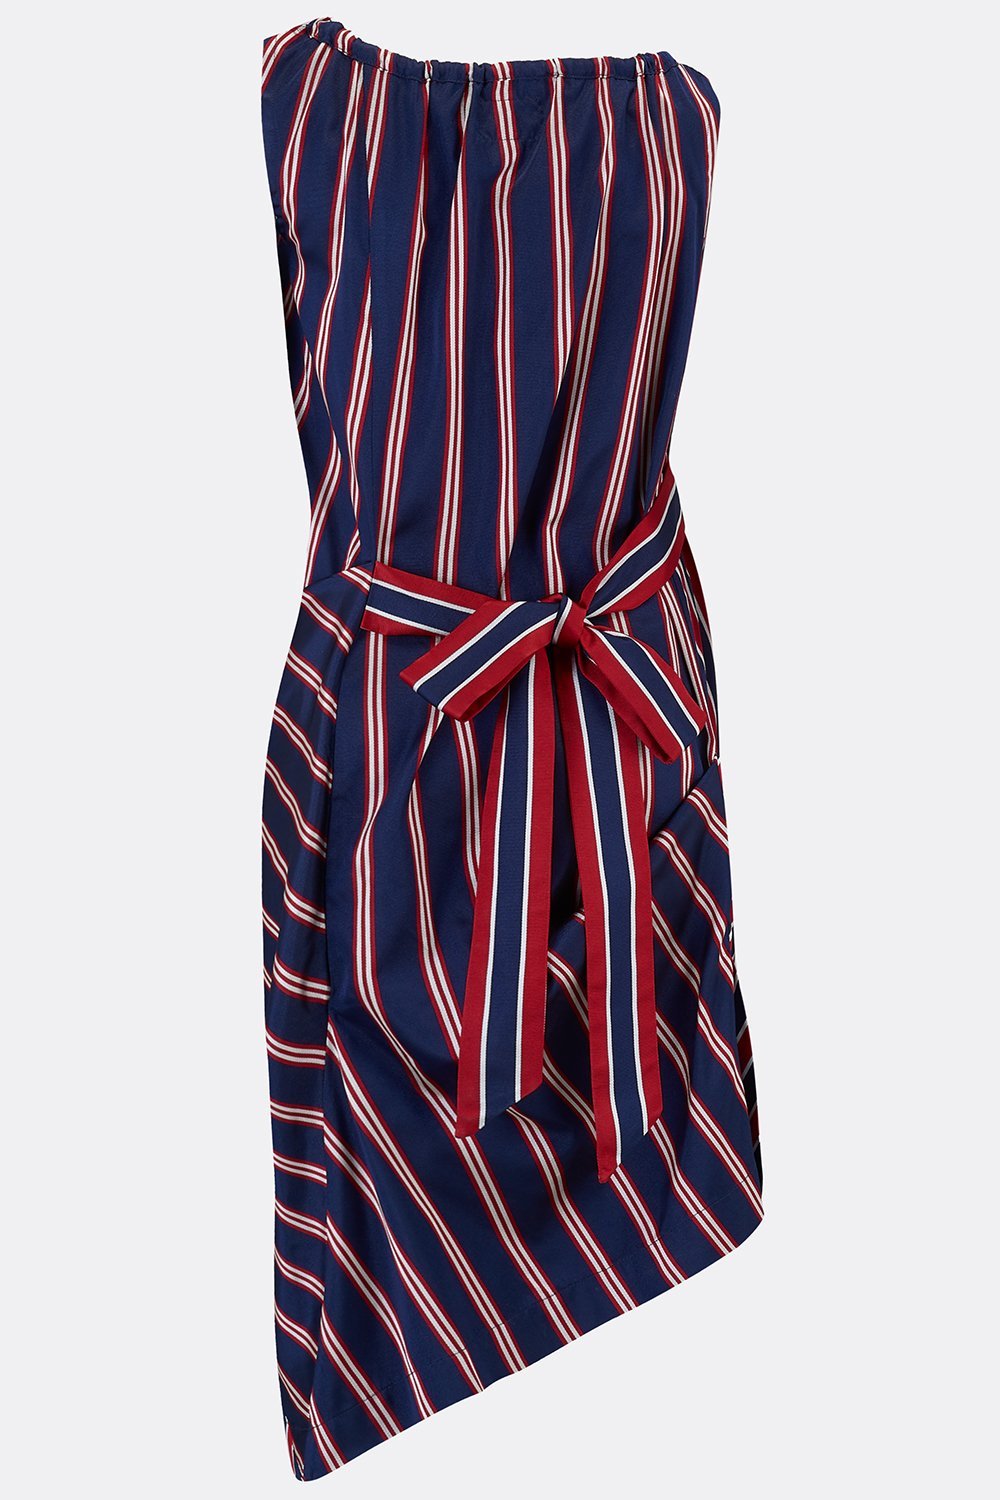 ROCHESTER SWAG DRESS IN NAVY STRIPE-womenswear-A Child Of The Jago